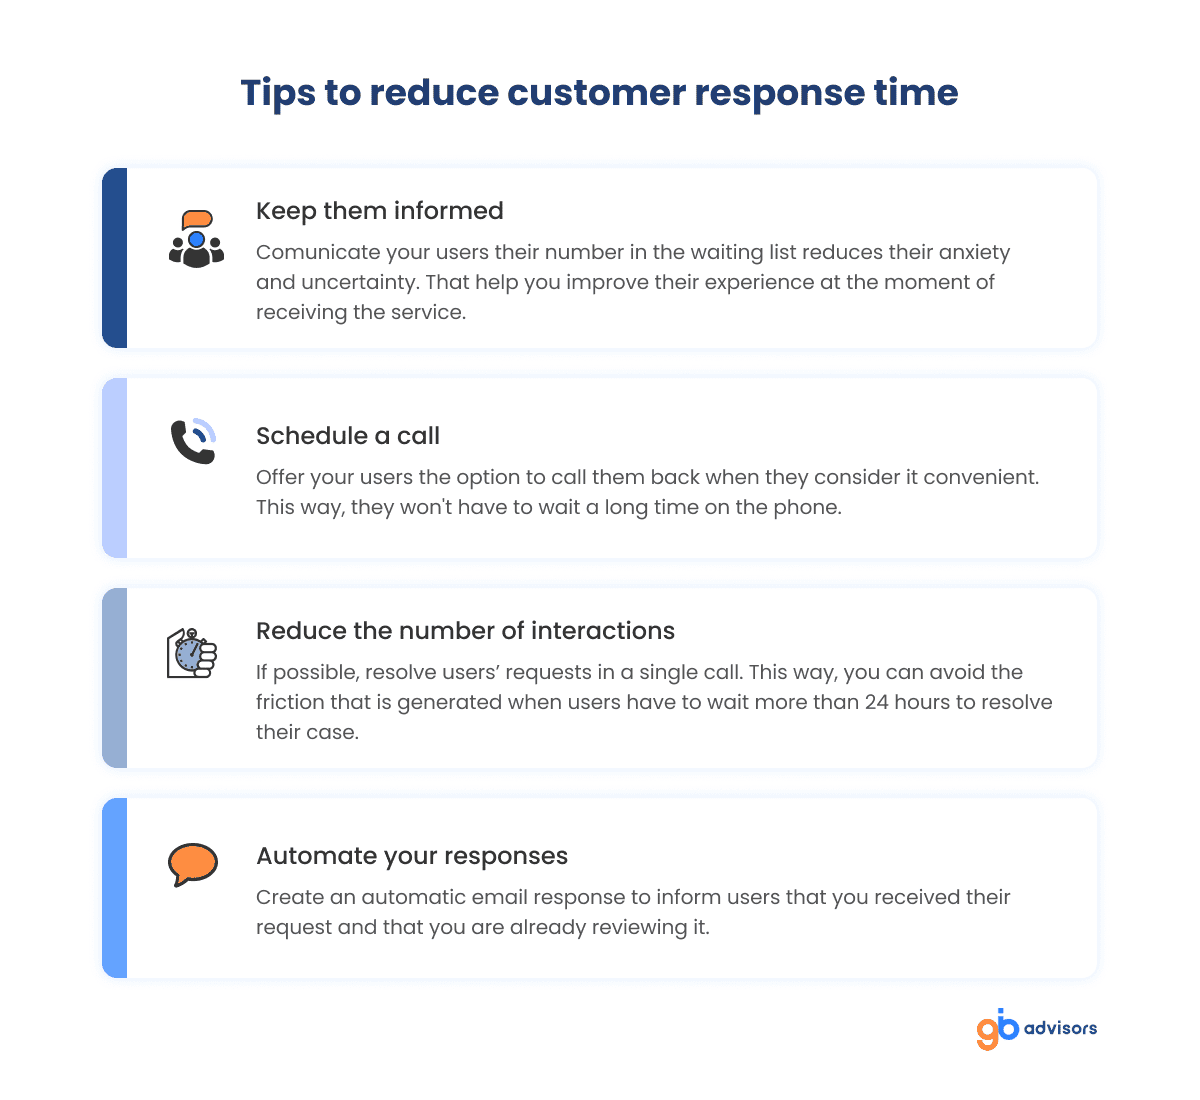 Tips to reduce customer response time